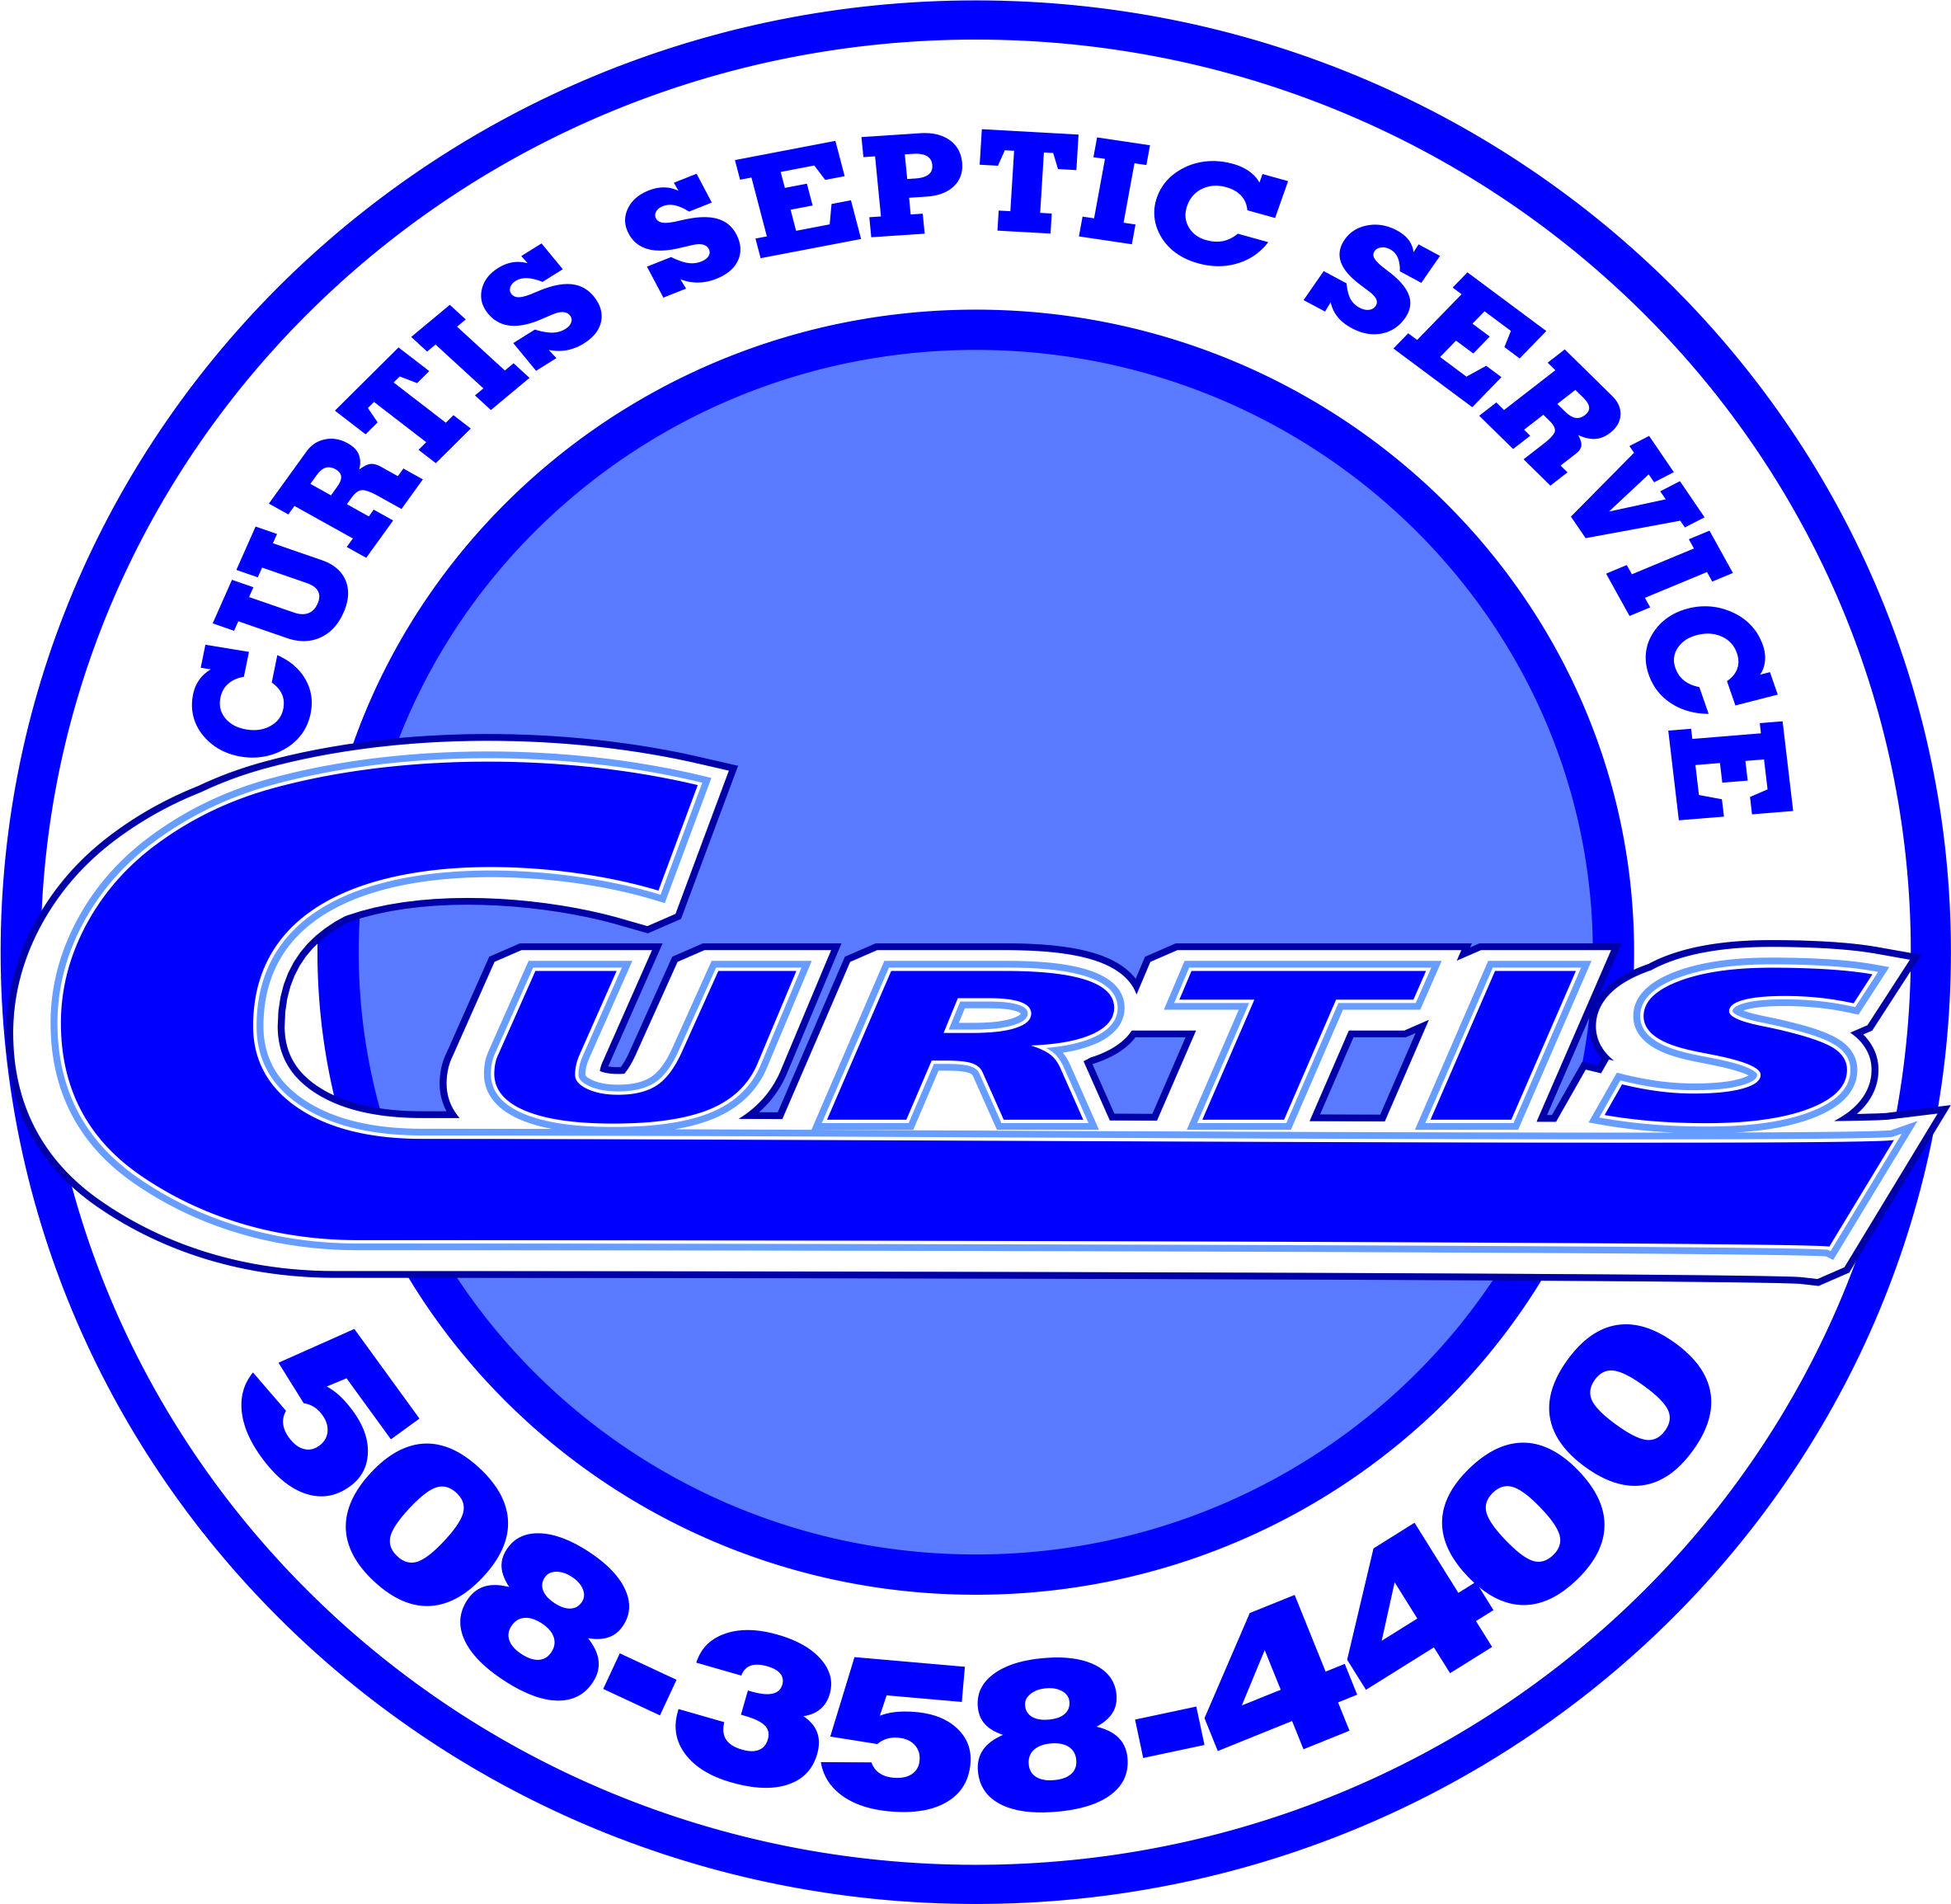 Septic system inspectors in Princeton, MA.